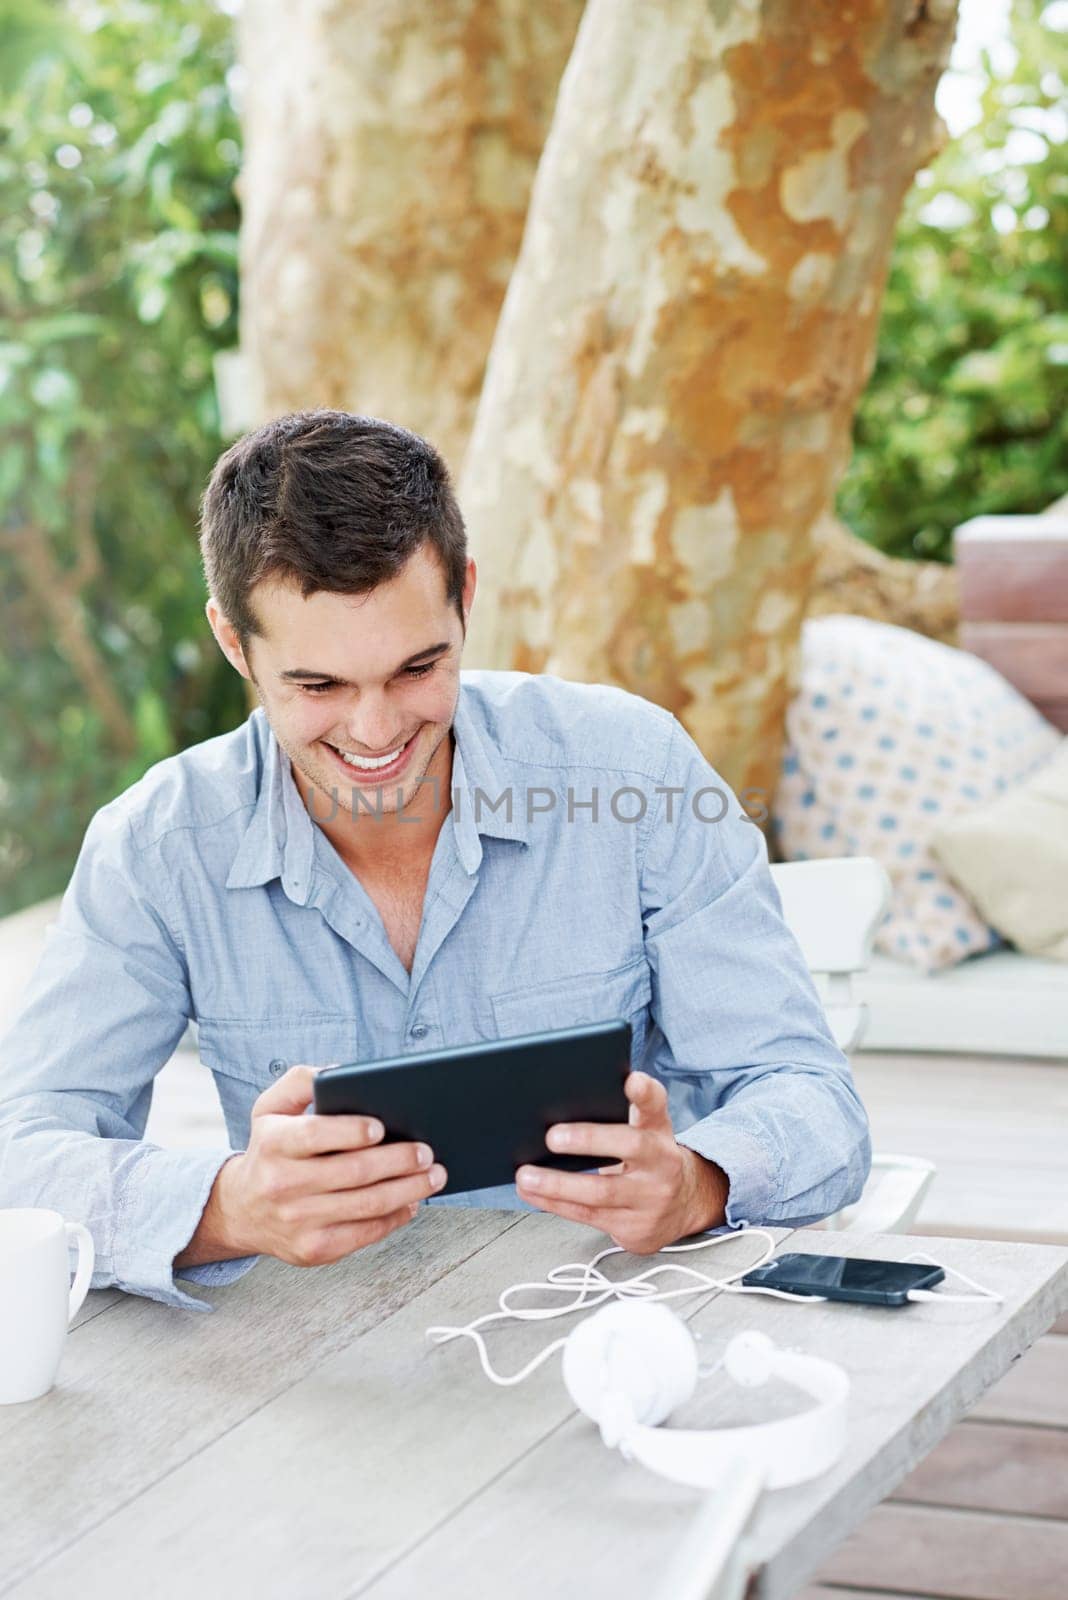 Internet, smile and man with tablet on patio for networking, communication and social media. Happy, male person and desk with technology in garden for online search, digital streaming or information by YuriArcurs